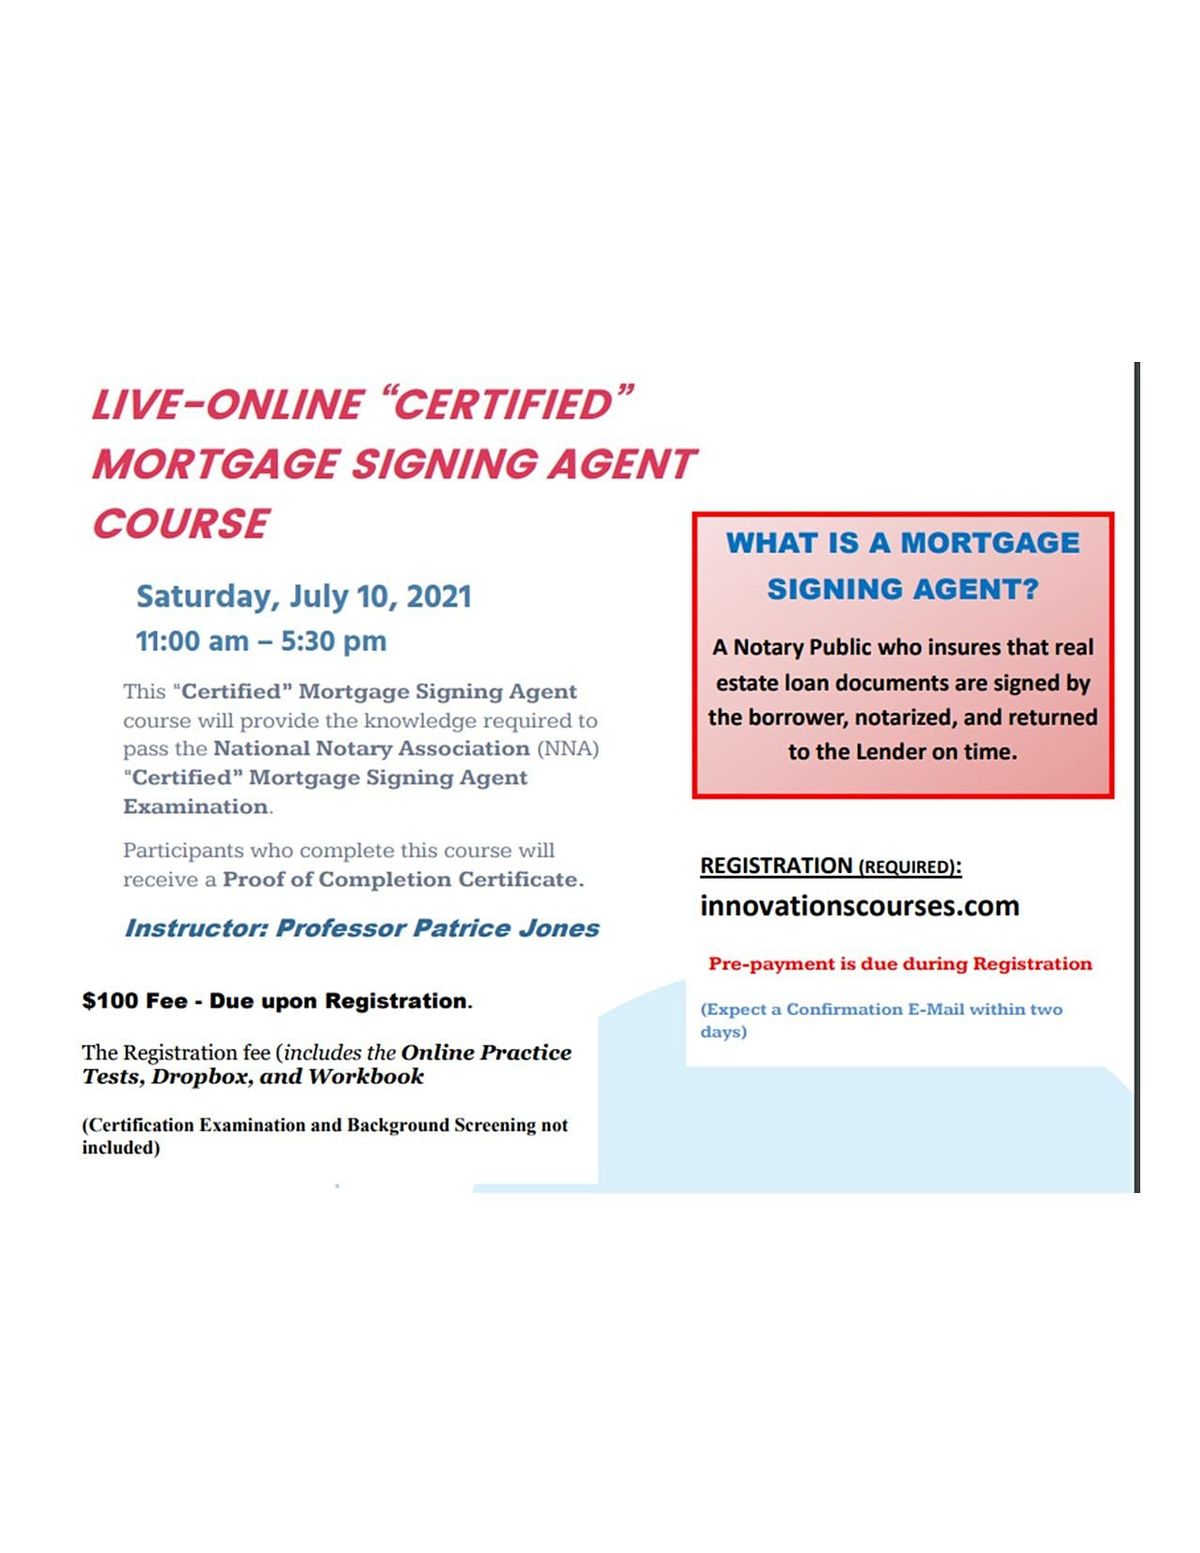 "LIVE" ONLINE - CERTIFIED MORTGAGE SIGNING AGENT COURSE - JULY 10. 2021